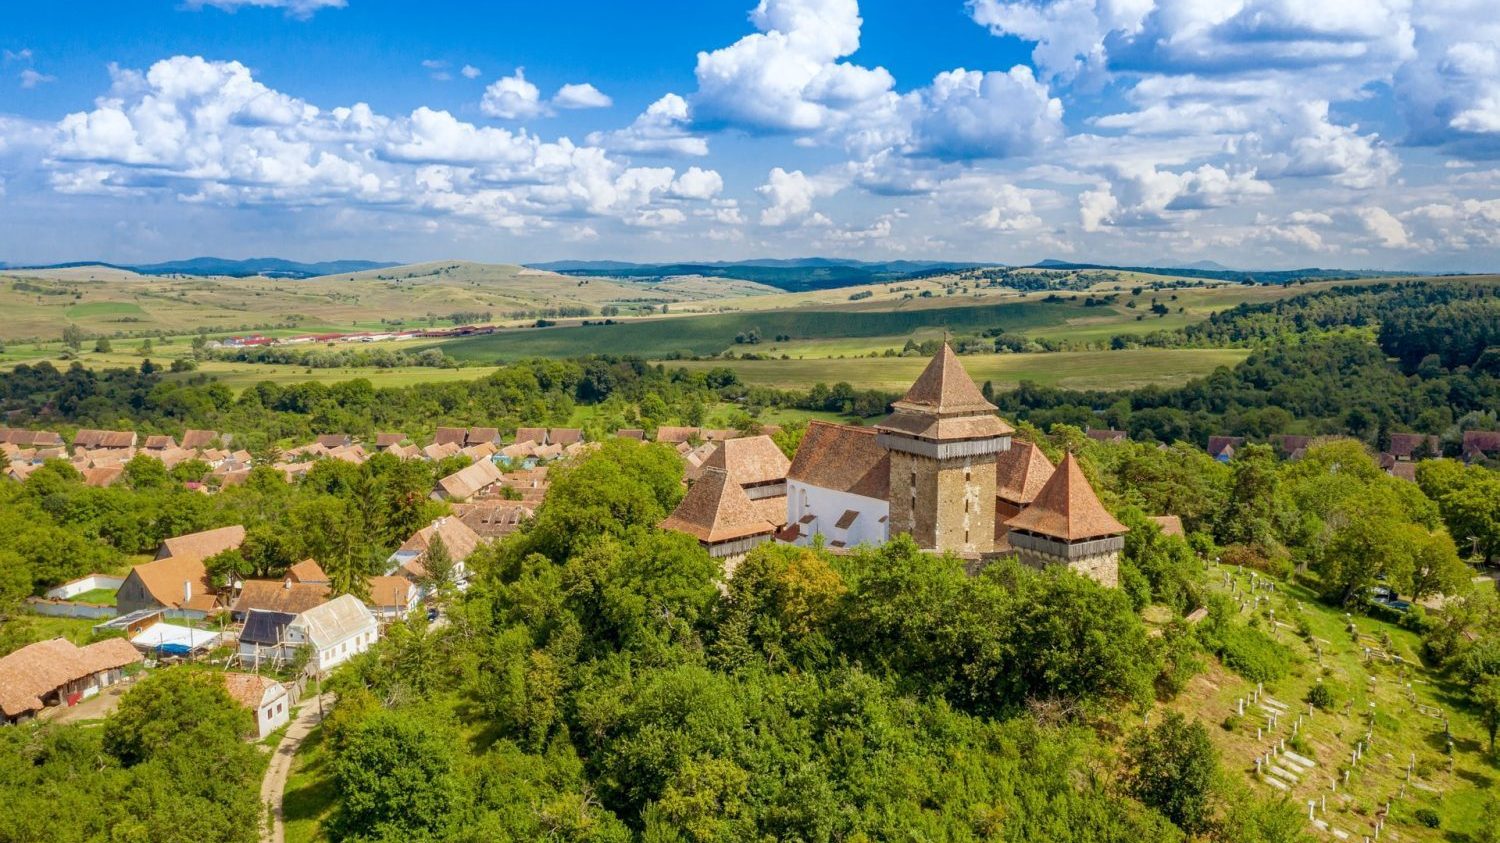 5 villages in Transylvania worth visiting on a road trip